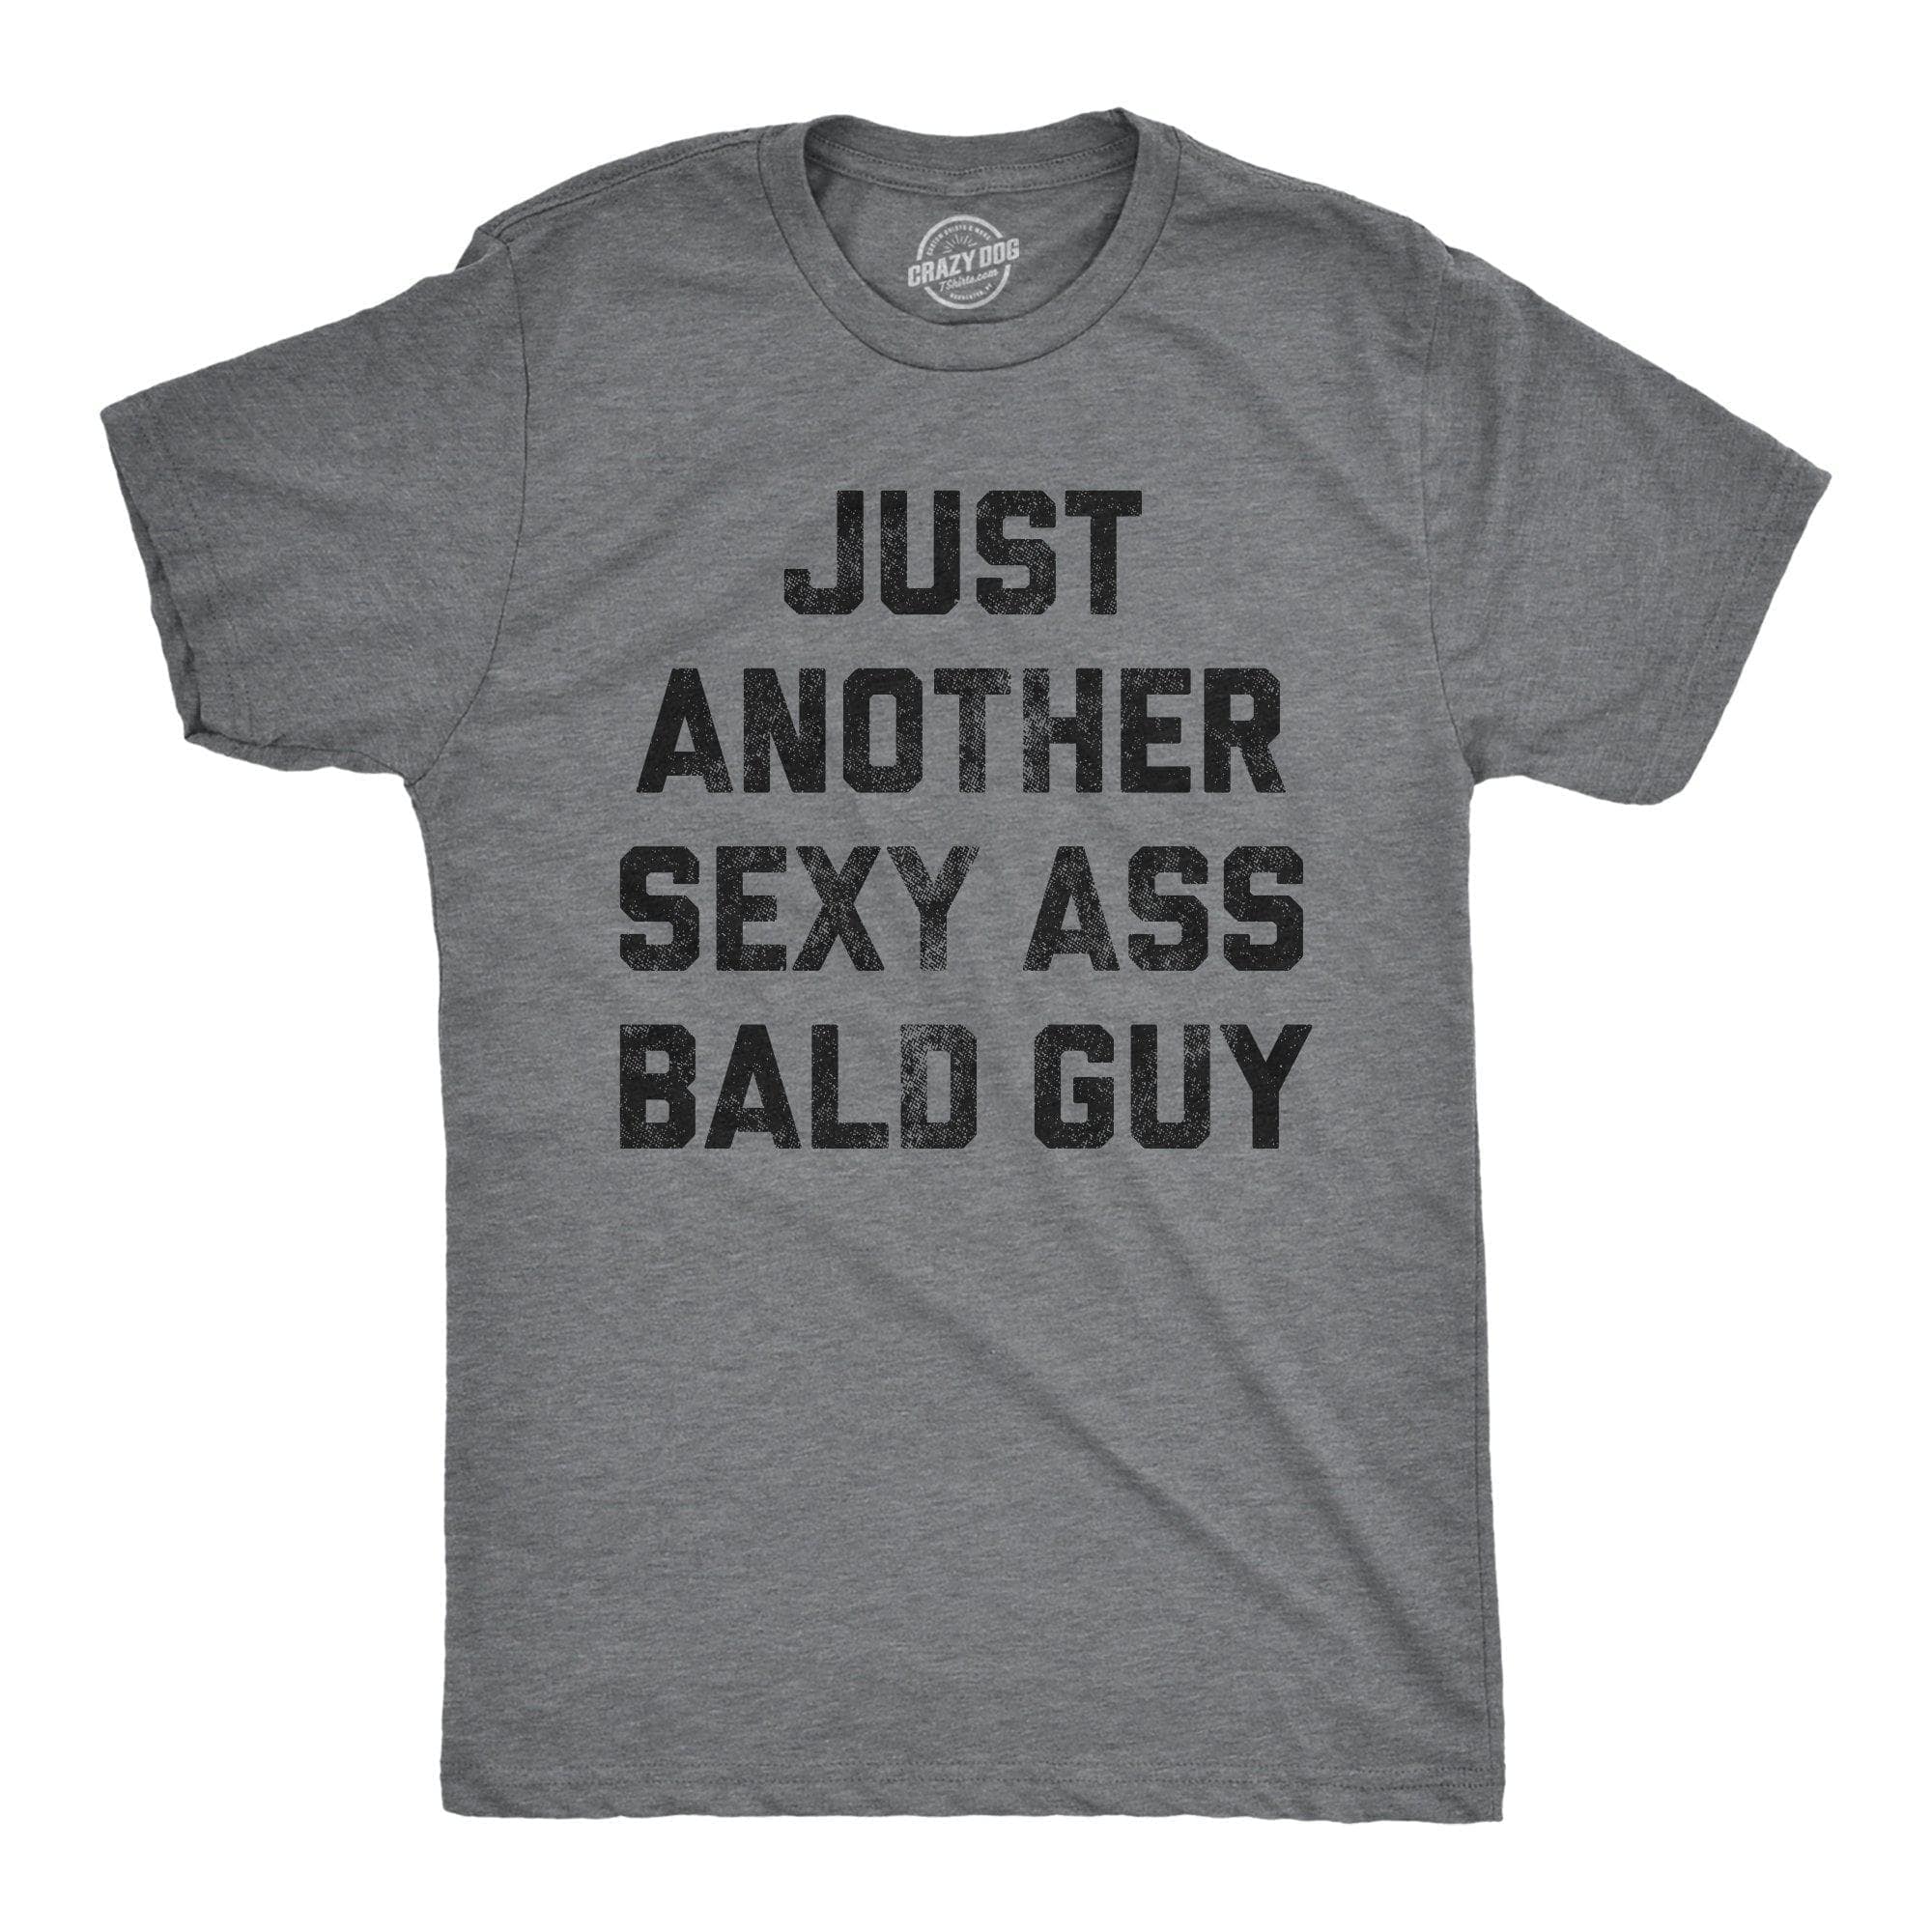 Just Another Sexy Bald Guy Men's Tshirt - Crazy Dog T-Shirts